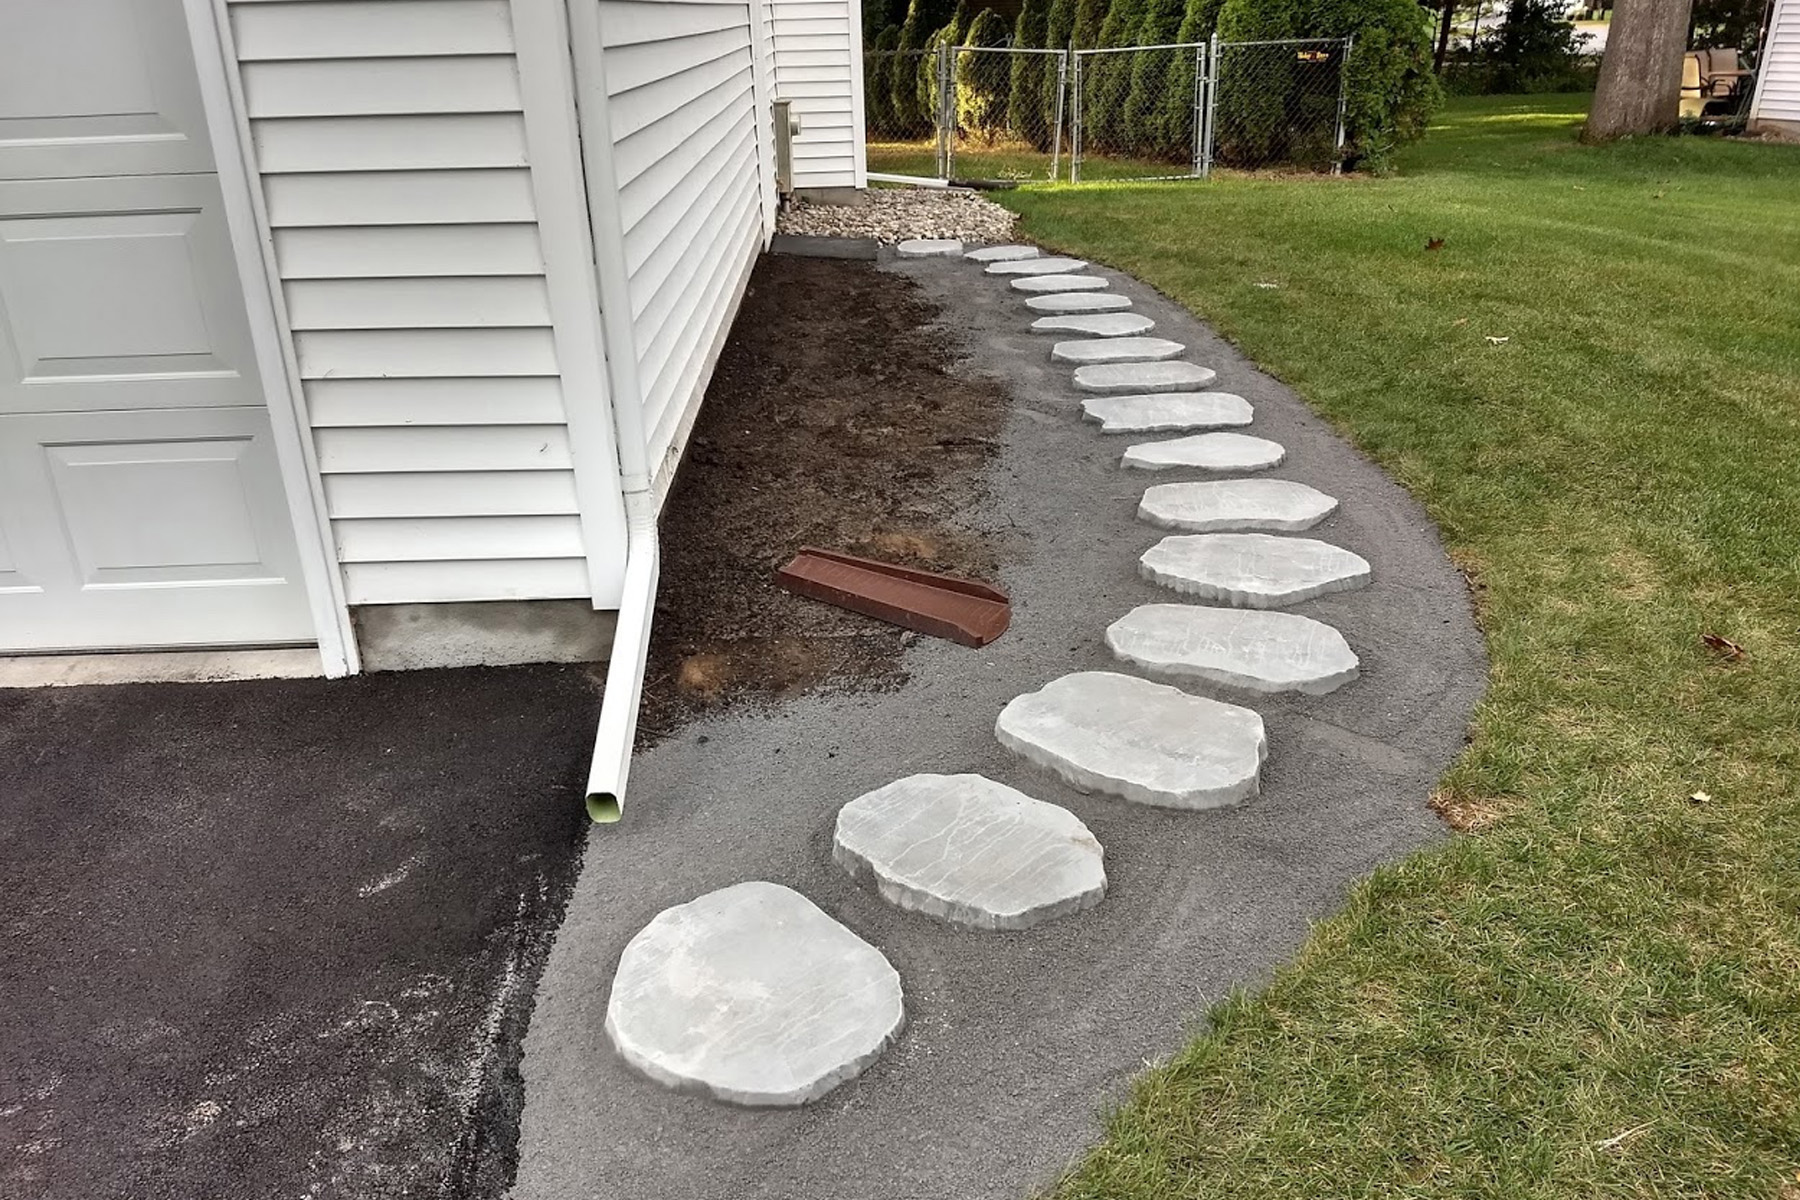 Thumbnail of the pavers set in sand along the side of the garage